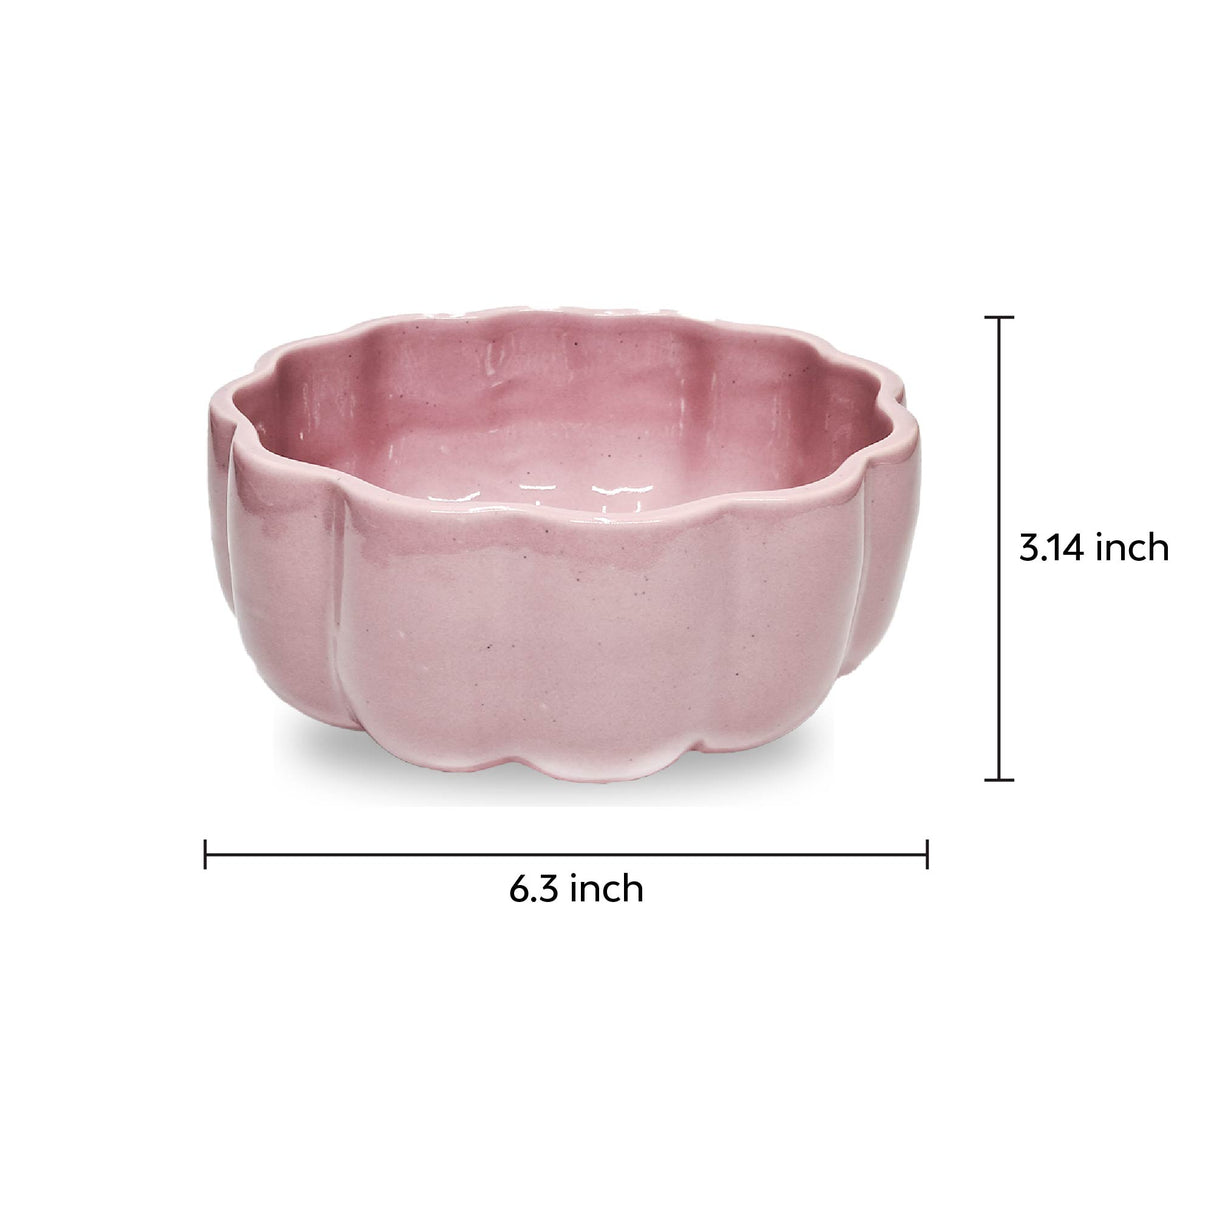 Aesthetic Peach Scalloped serving bowl